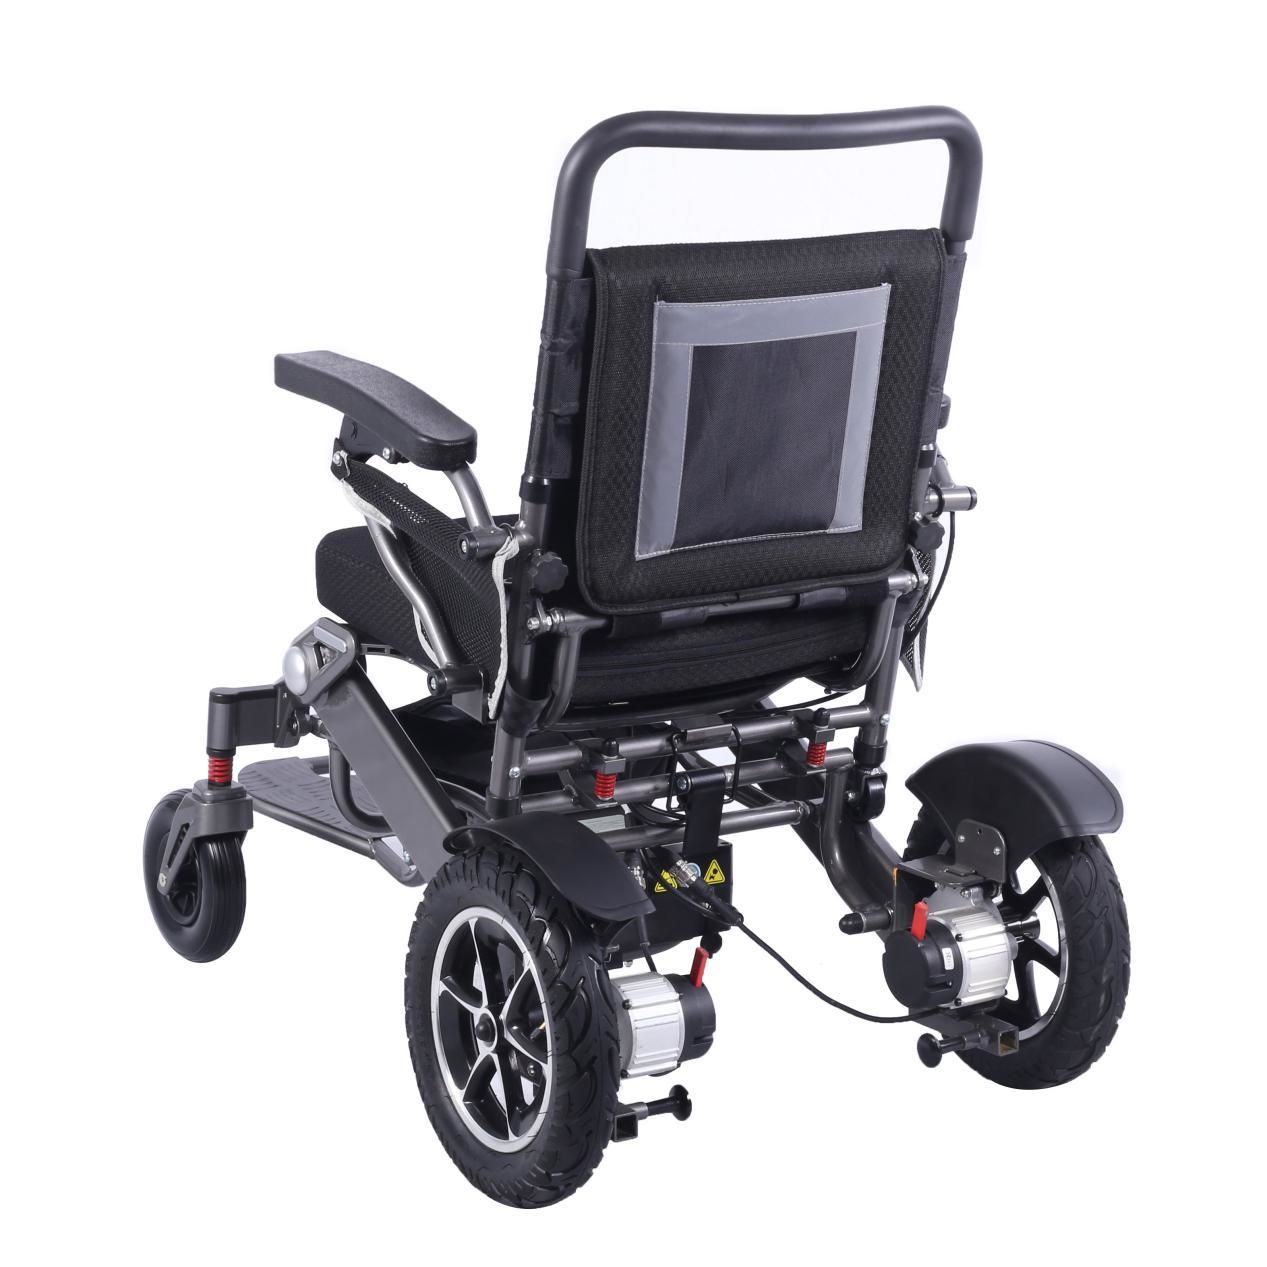 Carbon fiber wheelchair factory:What should be paid attention to when selecting a wheelchair?